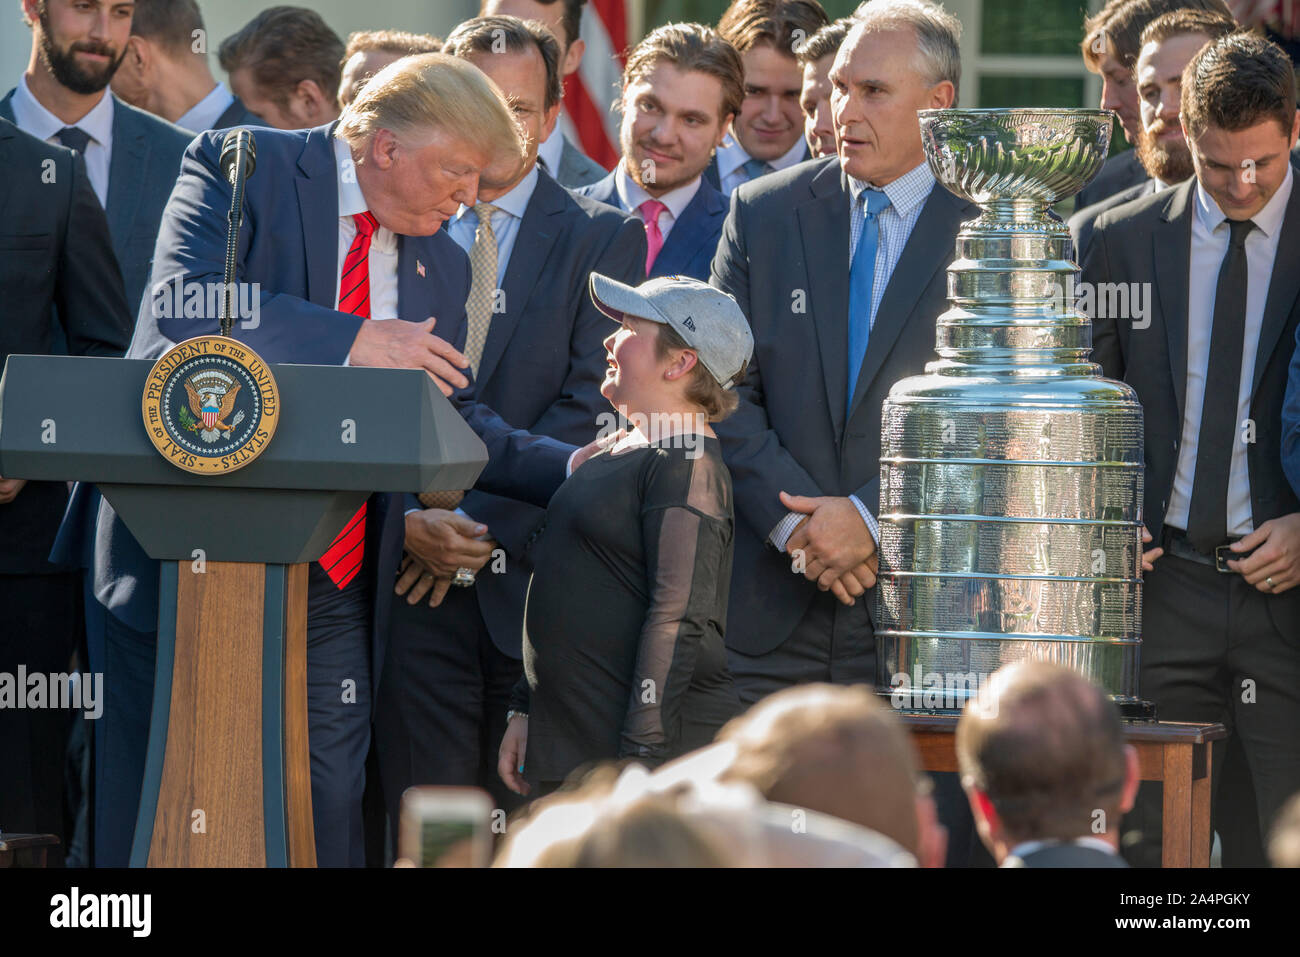 President Donald J Trump welcomes the Stanley Cup Champions, St Louis Blues to the White House during a ceremony in the White House Rose Garden. Stock Photo